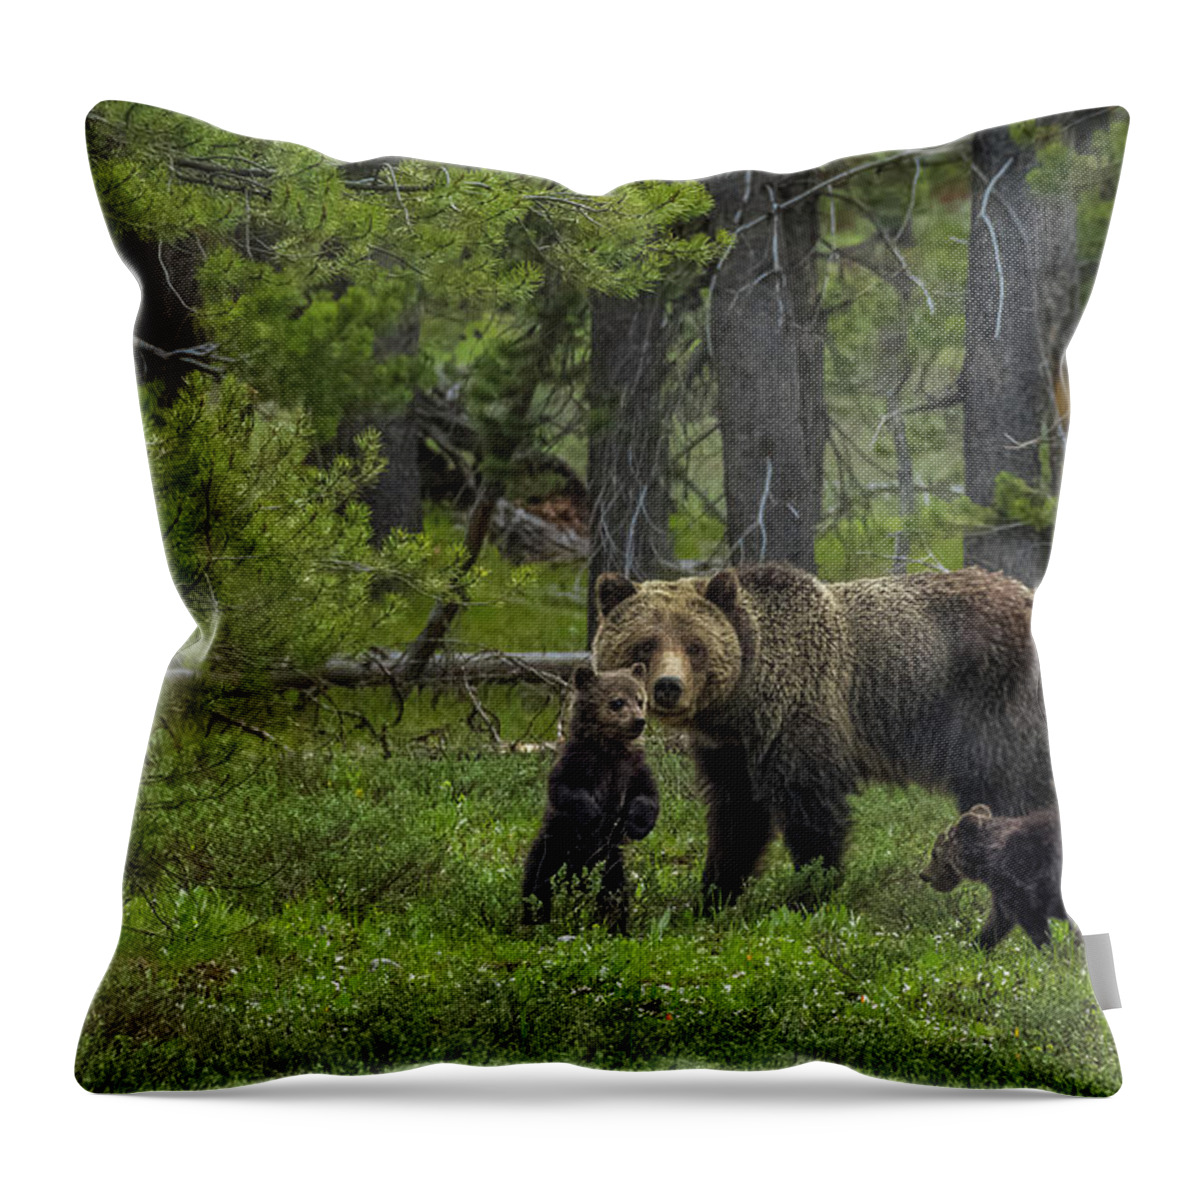 Blondie Throw Pillow featuring the photograph Hello World by Yeates Photography